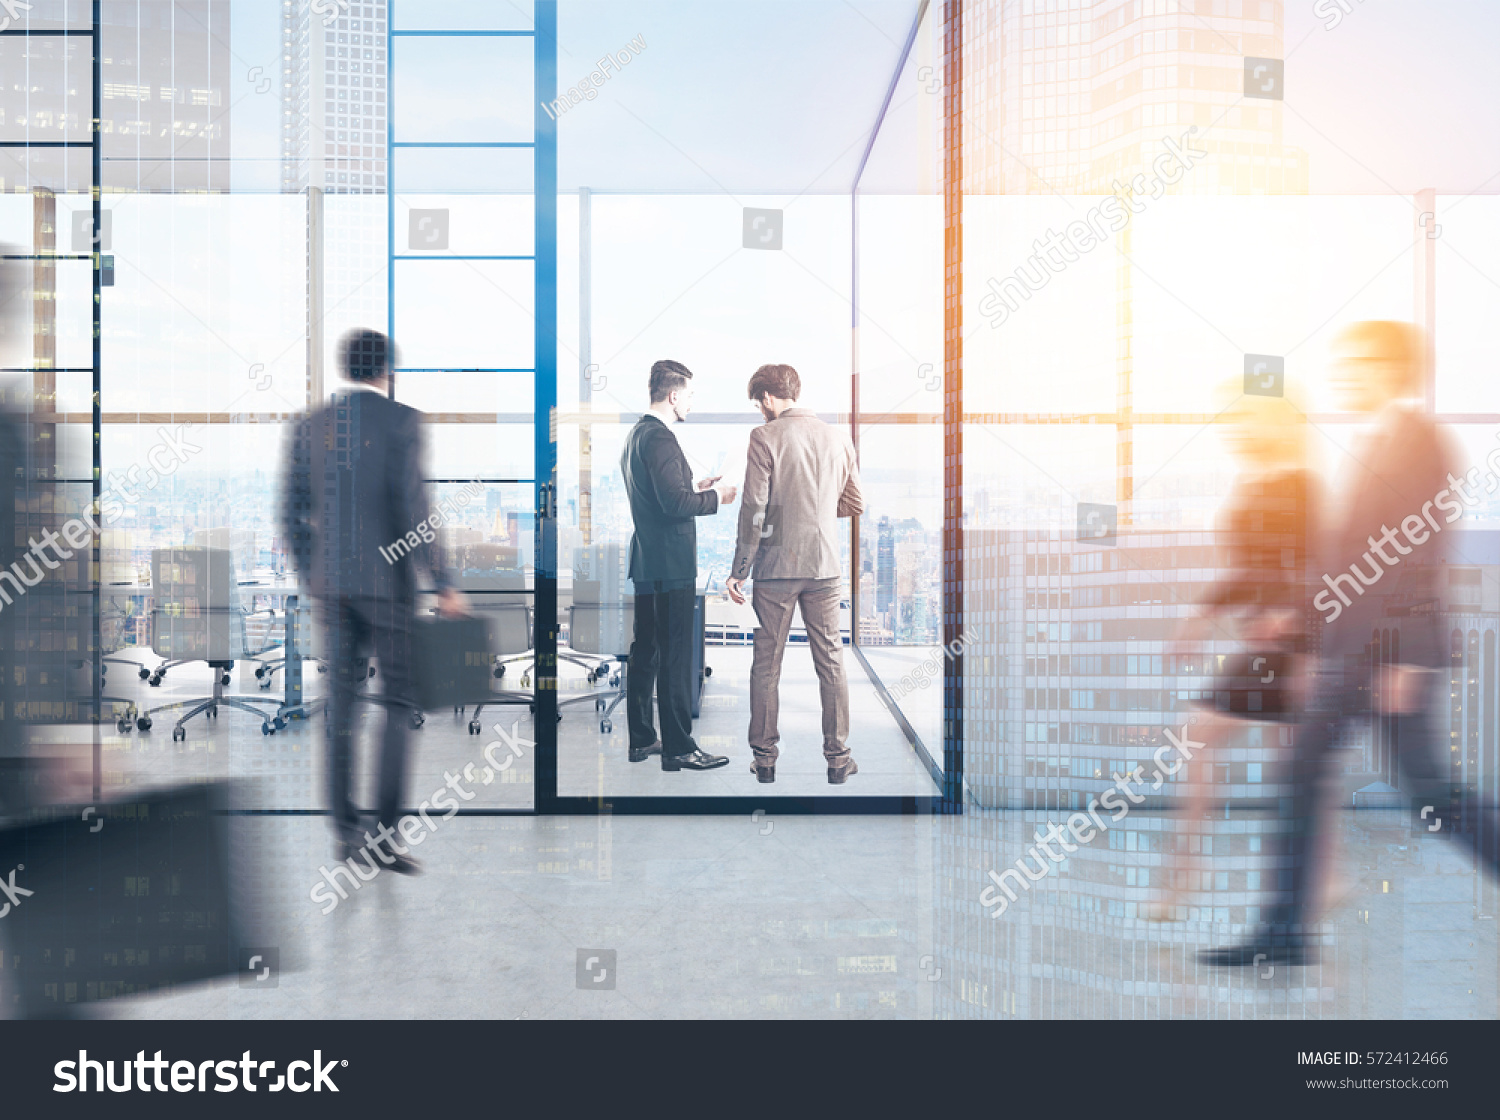 Rear view of people in a meeting room with glass walls. Reception counter is to the right of it. 3d rendering. Toned image. Double exposure. #572412466